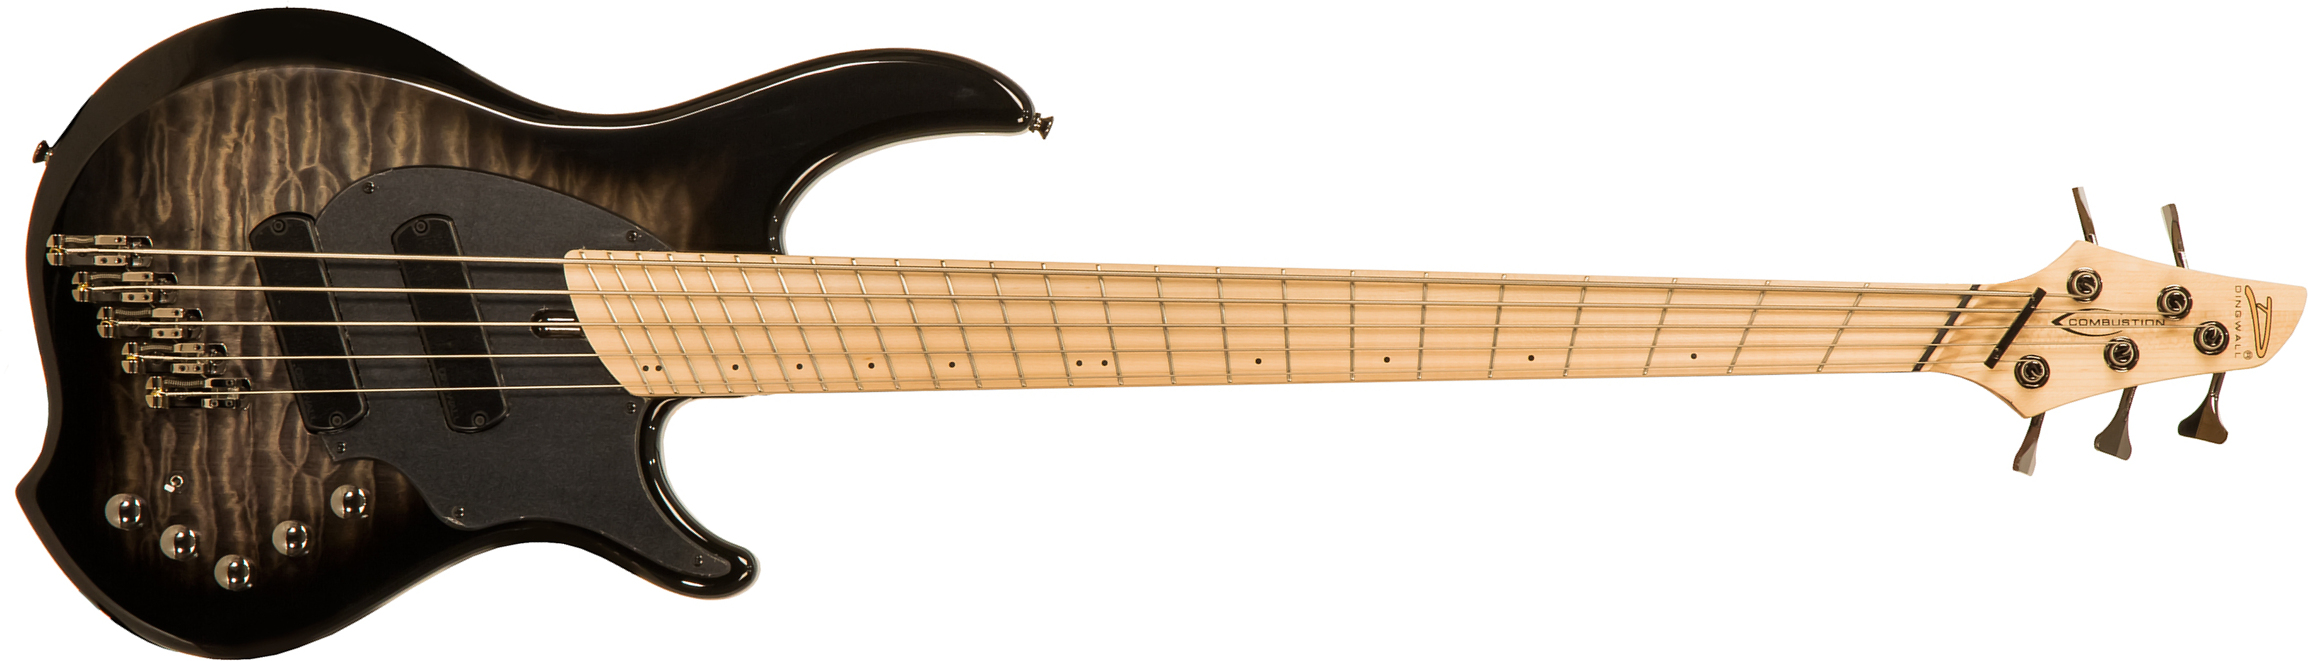 Dingwall Combustion Cb2 5c 2pu Active Mn - 2-tone Blackburst - Solid body electric bass - Main picture